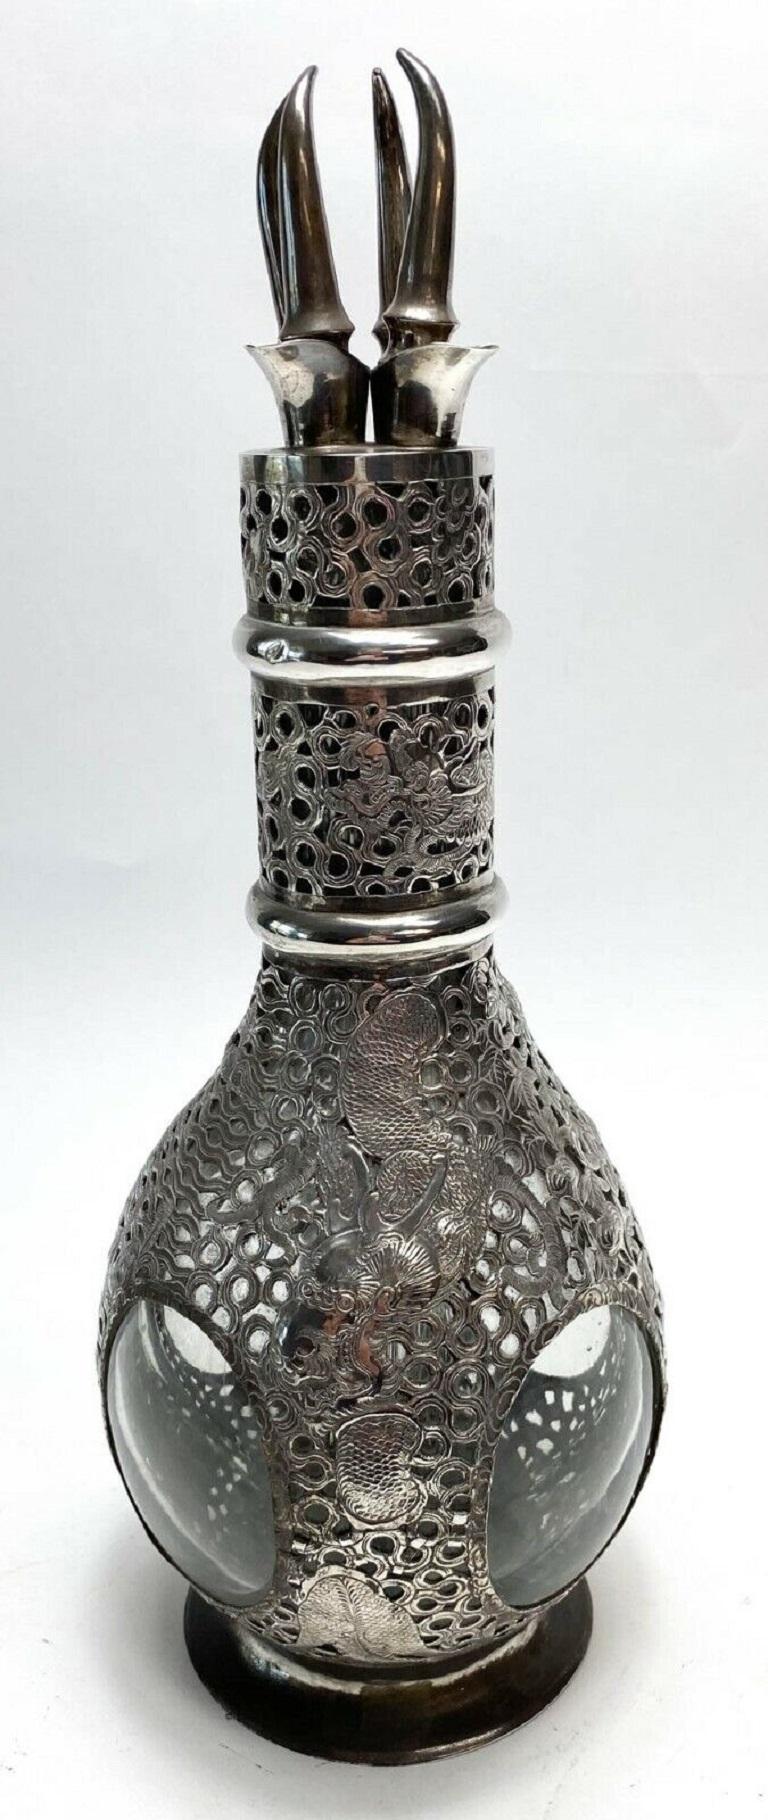 Chinese Silver Overlay Four Compartment Liquor Decanter, c1920

The silver overlay decanter has 4 separate sections for alcohol. Each compartment with a different pattern to the silver overlay. Each side of the decanter depicts bamboo, naval scene,